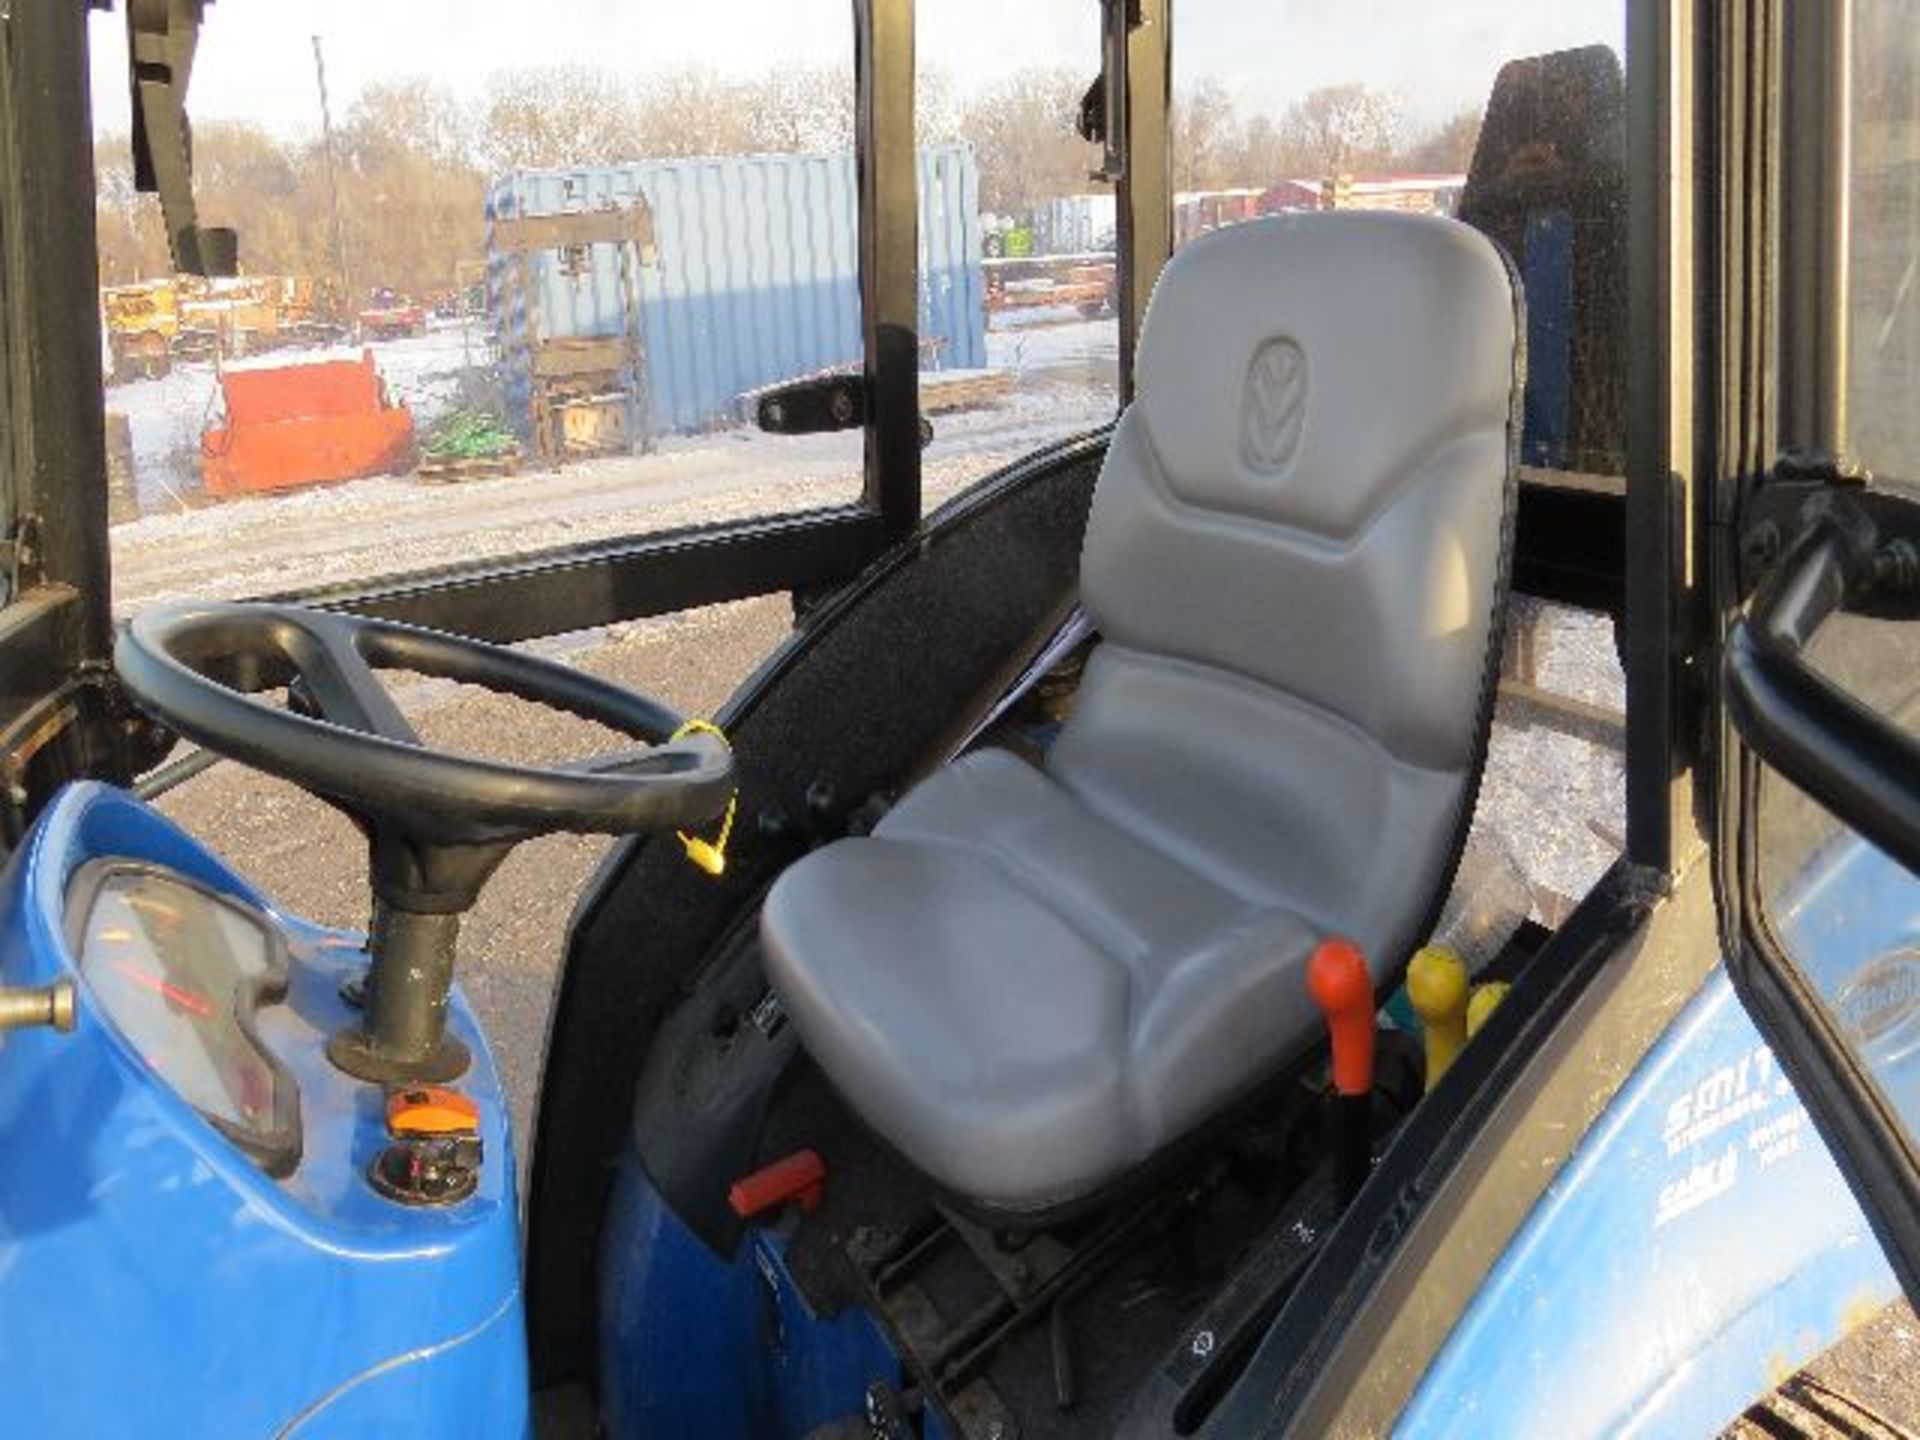 2004 New Holland model  TC24DA tractor, sn HG10183, 260 hrs. on meter, front wheel assist, cab, - Image 5 of 9